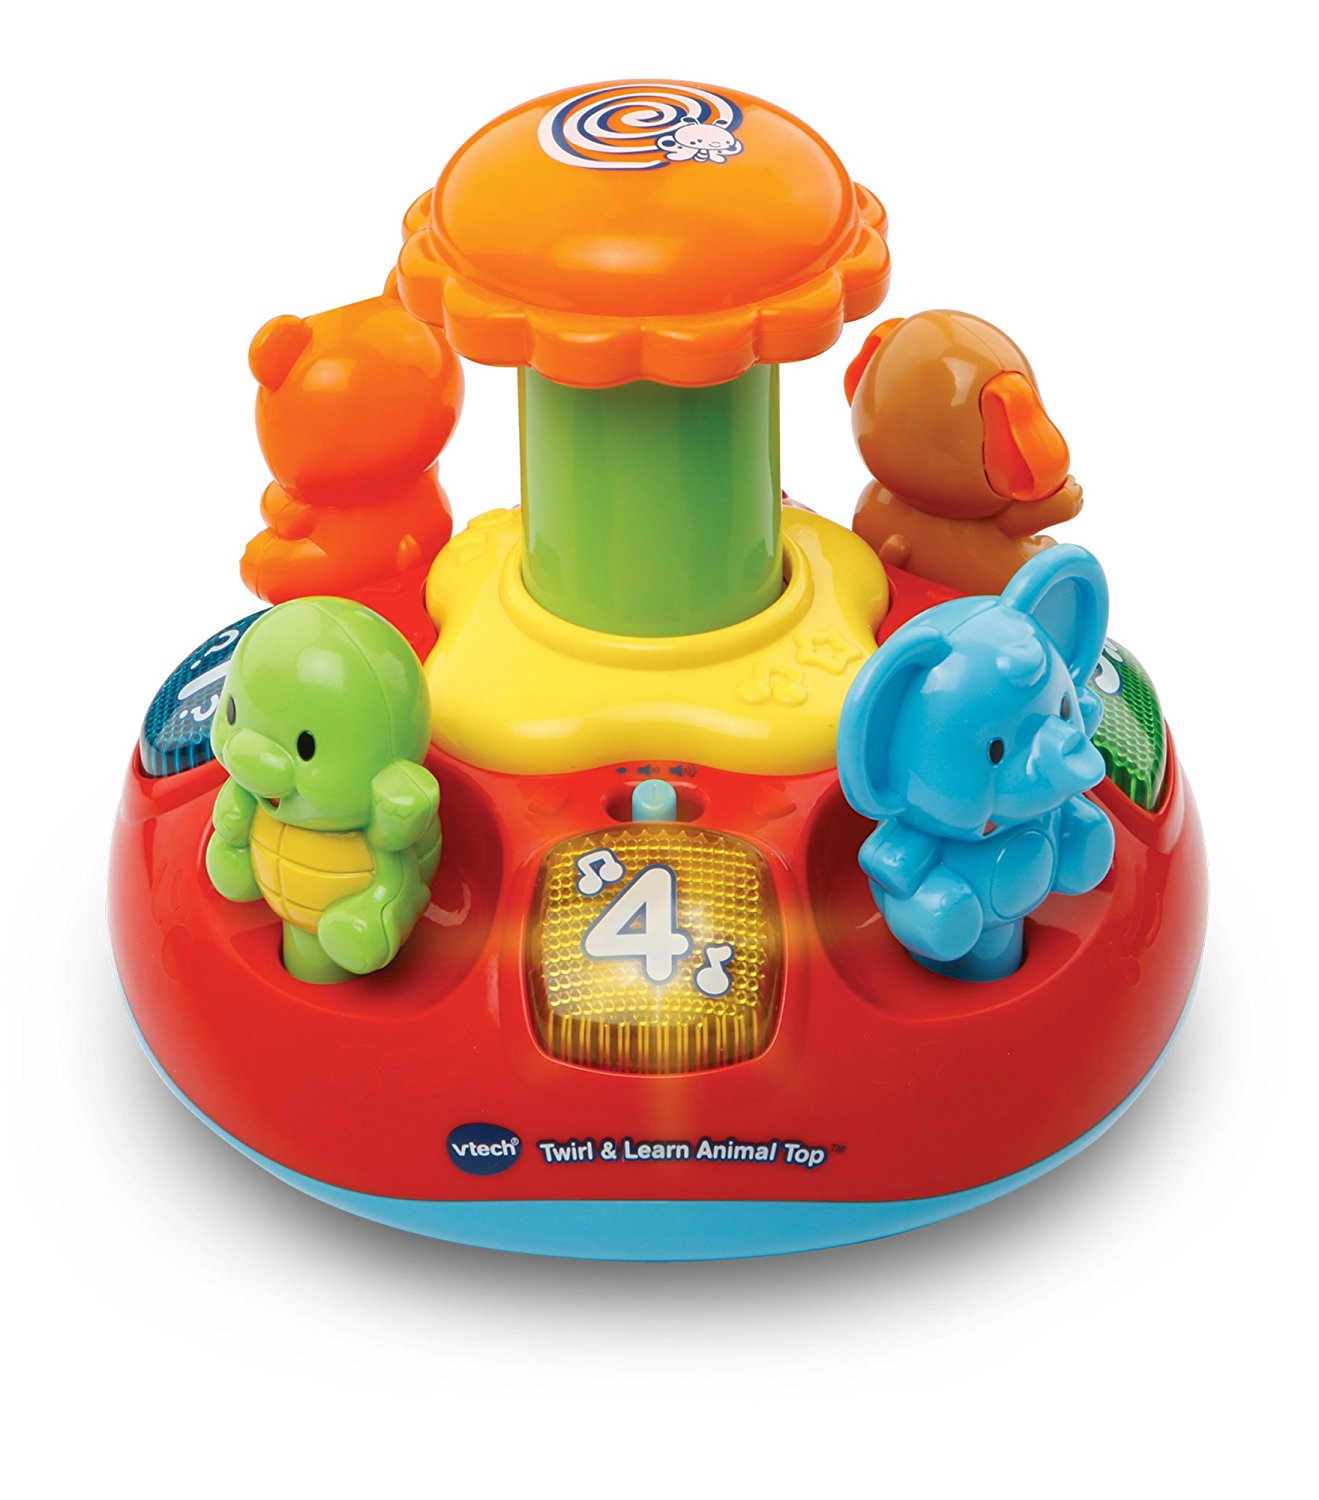 VTech Baby Push and Play Spinning Top Toy - Multi-Coloured: VTech ...